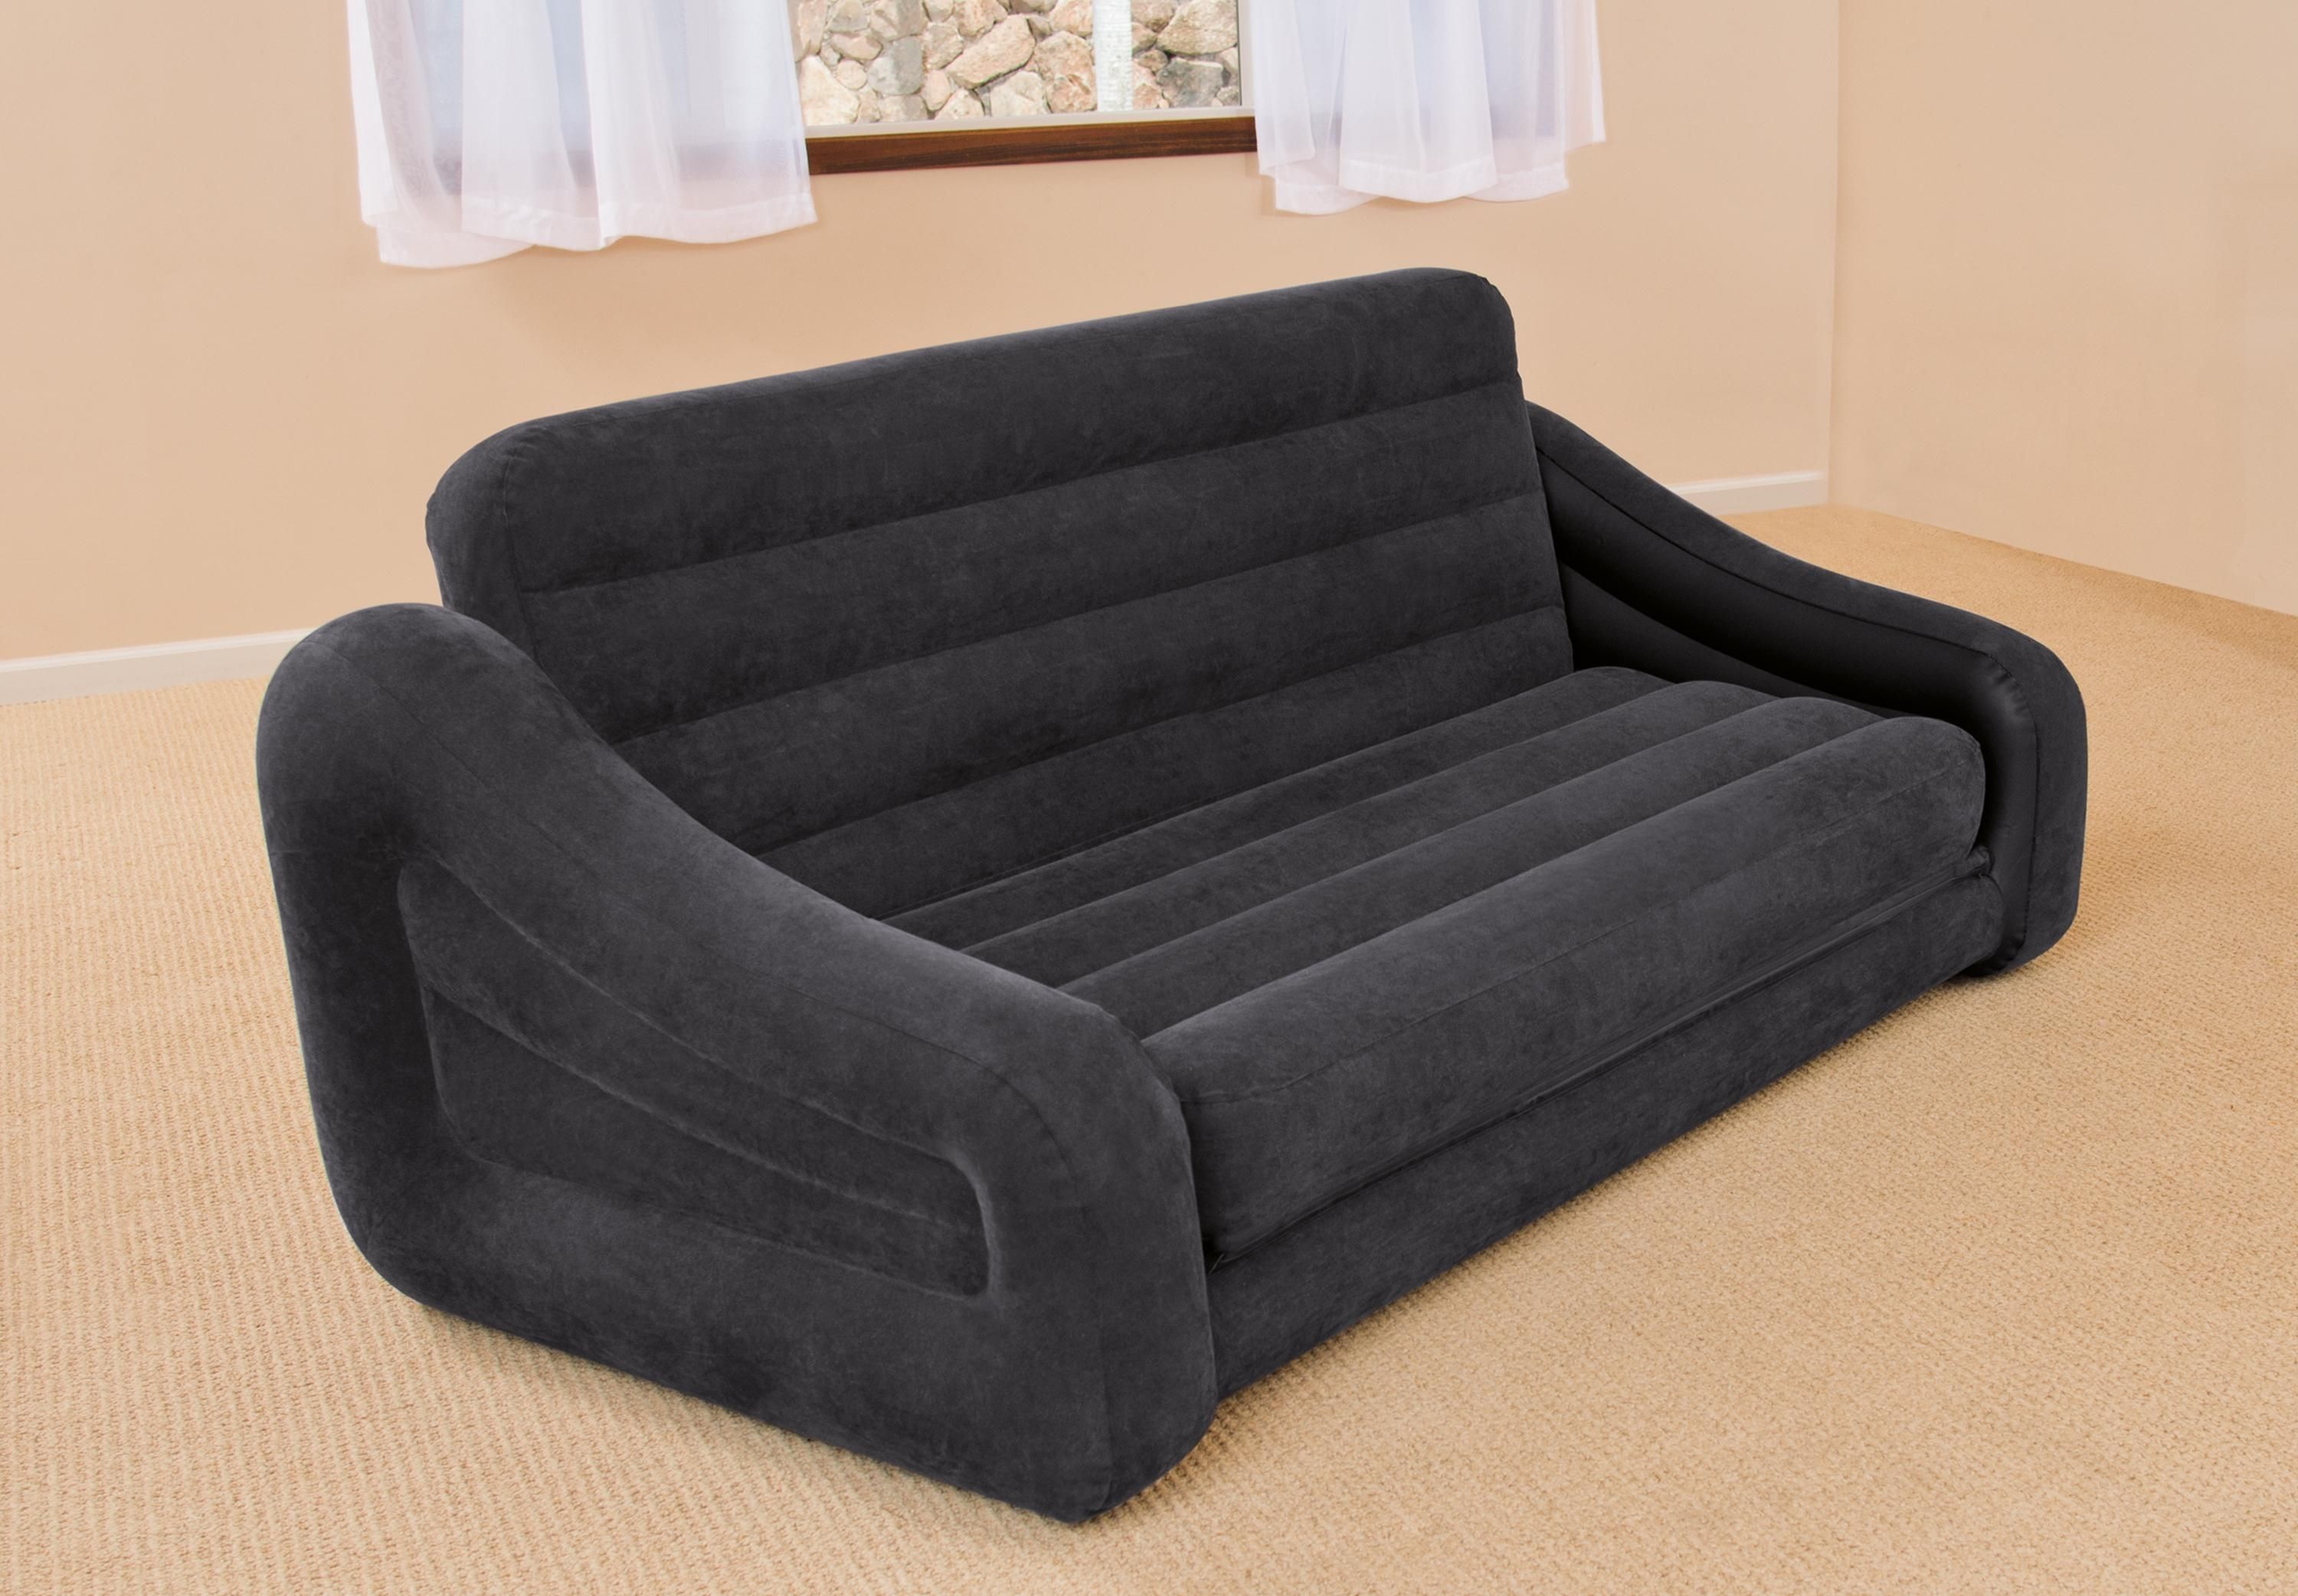 Sofas Center : Bunk With Pull Out Sofa Sofas Beds Thick Mattress Pertaining To Cheap Sofas Houston (View 20 of 20)